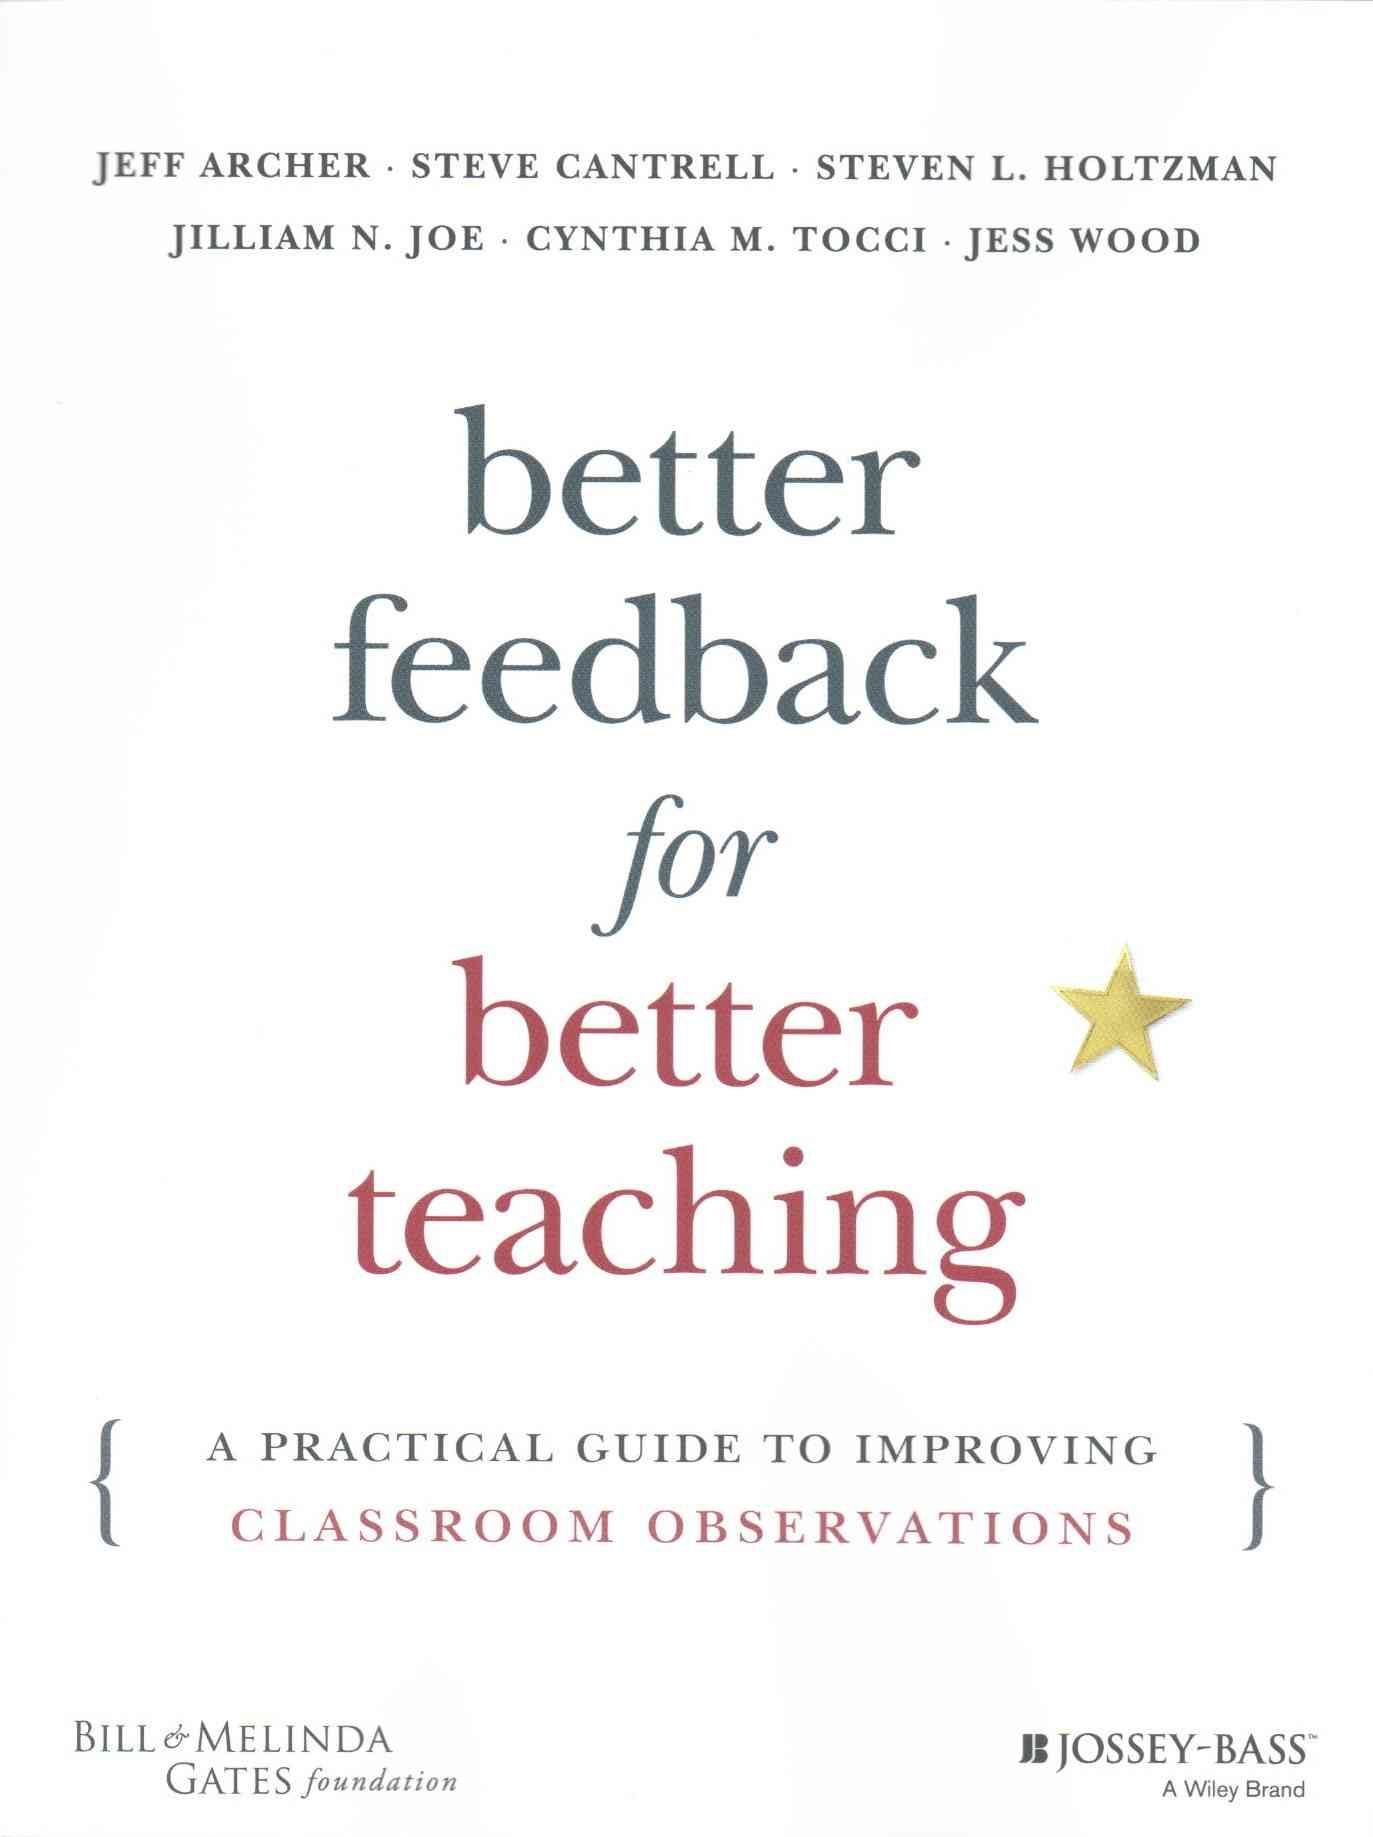 Better Feedback for Better Teaching - A Practical Guide to Improving Classroom Observations